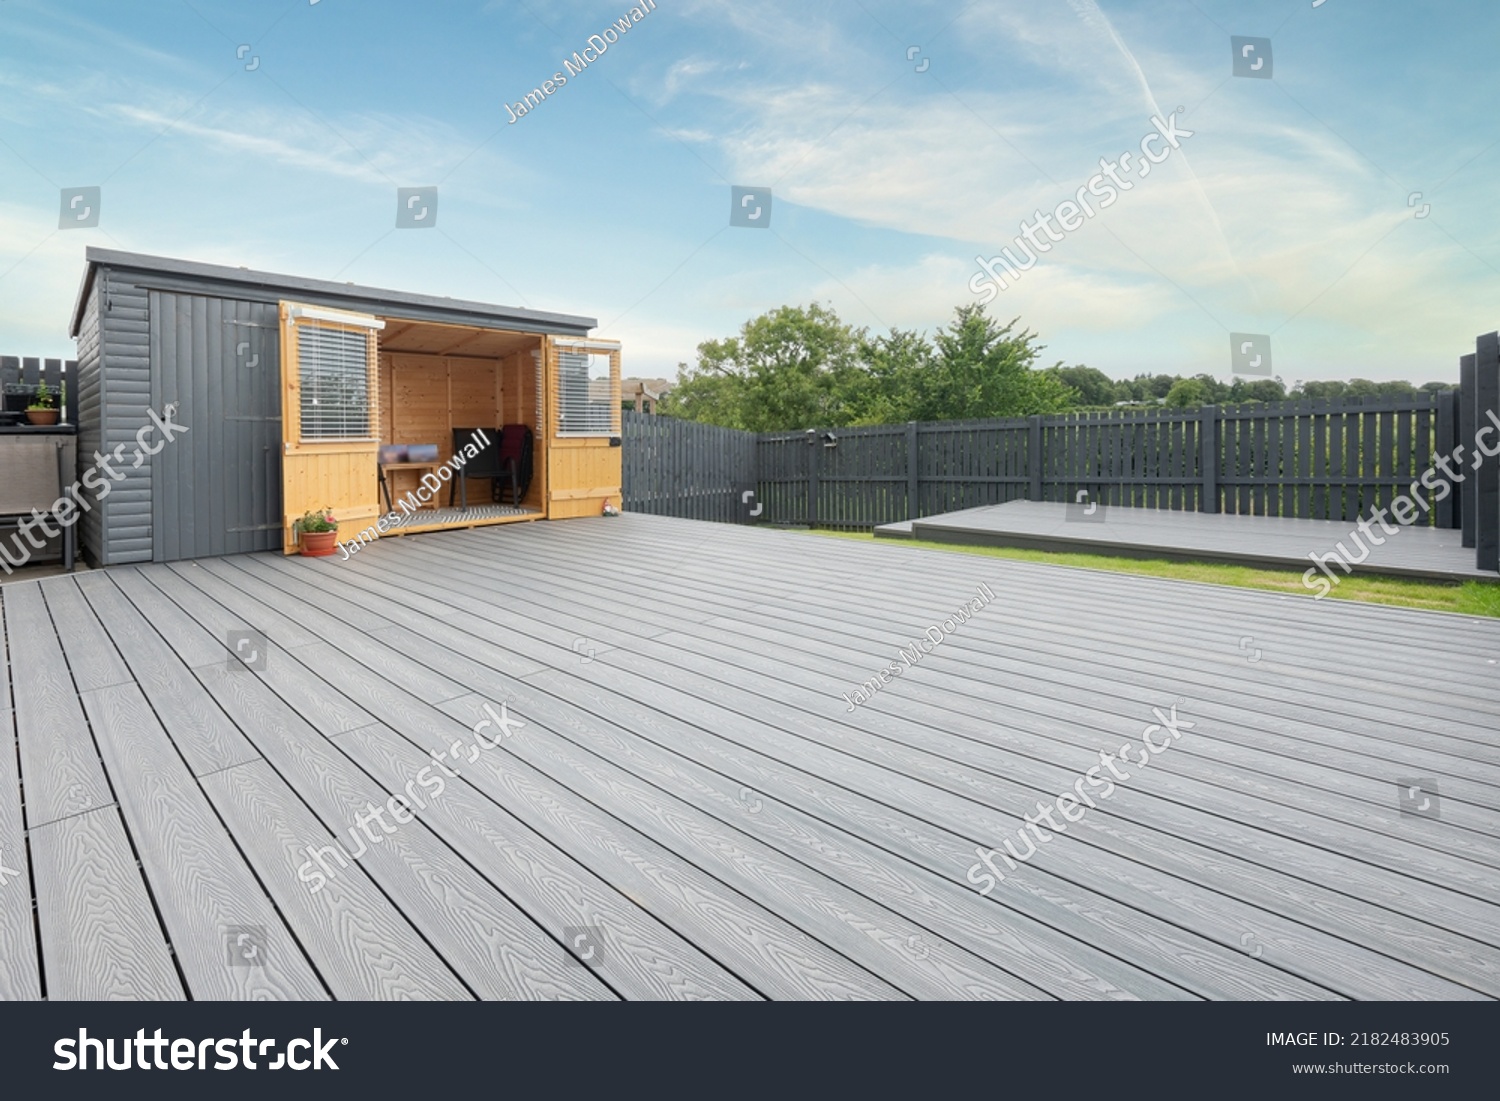 Ash grey composite decking built on two levels on a residential back garden with low voltage deck lights installed as well. Good Image for a landscape Gardiner #2182483905